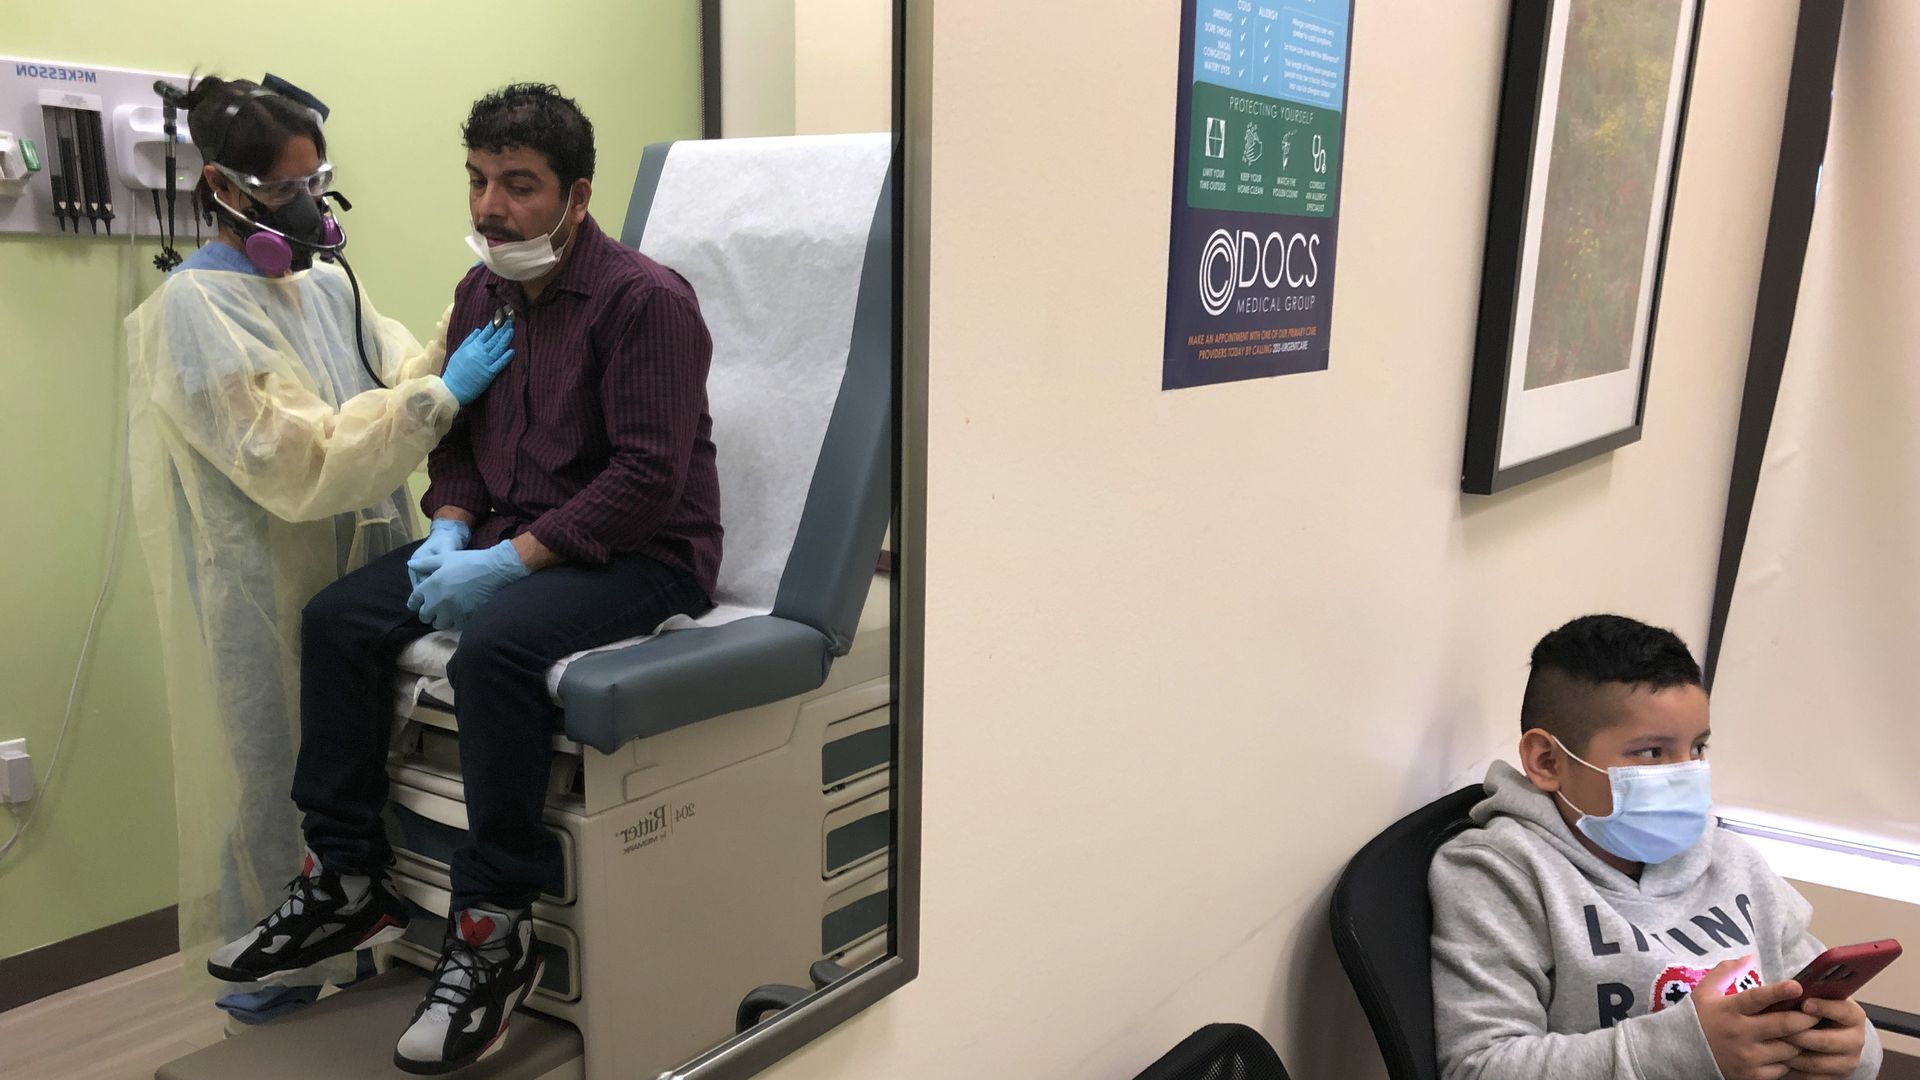 A man sits on an exam chair in a doctor's office while a nurse checks him out, and a kid sits in a waiting room.